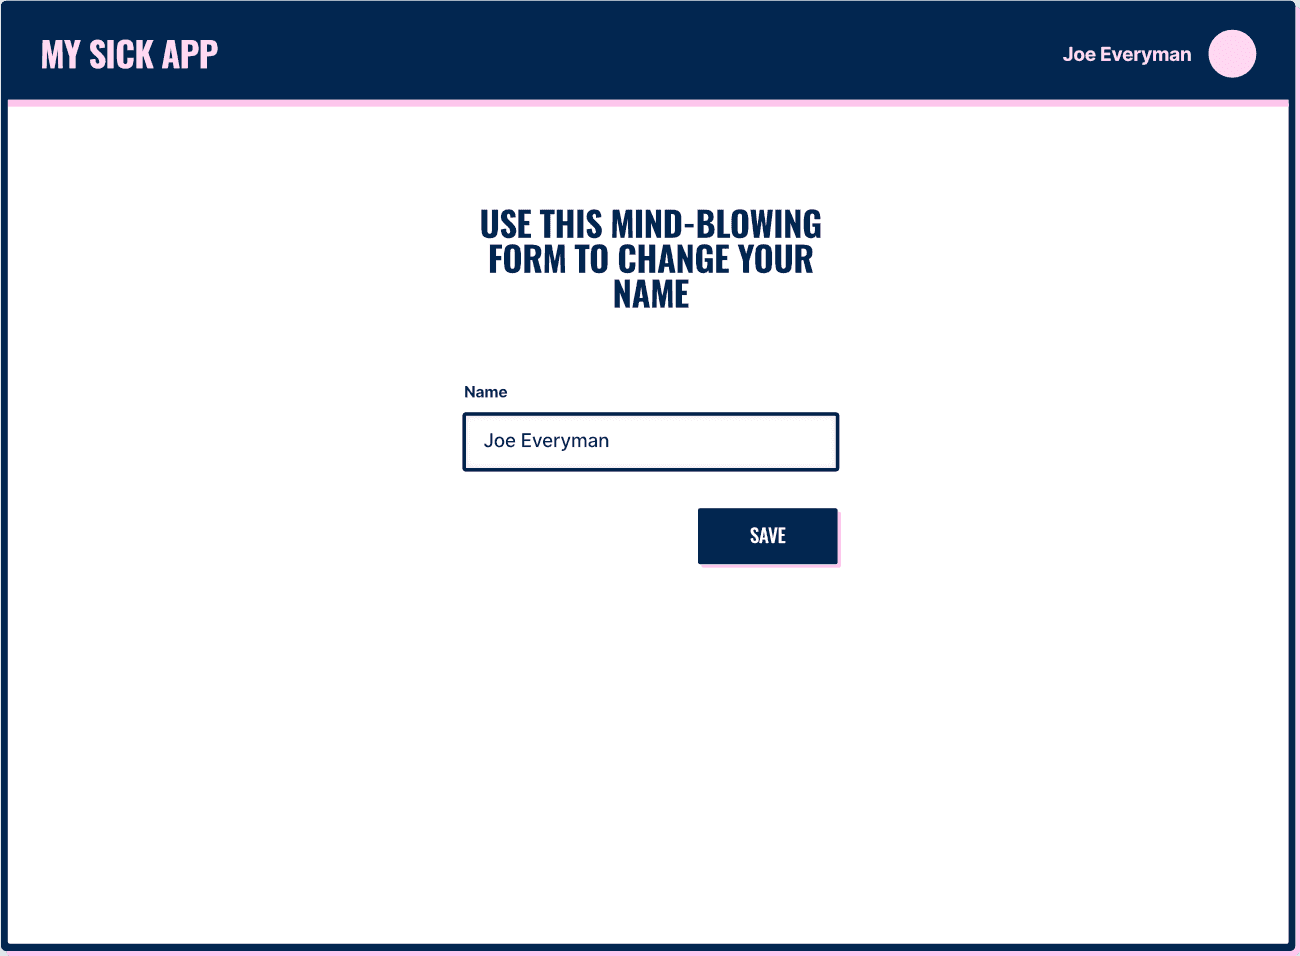 Web app mockup, showing a form to update the user's name, with their name also displayed in a global toolbar at the top of the screen